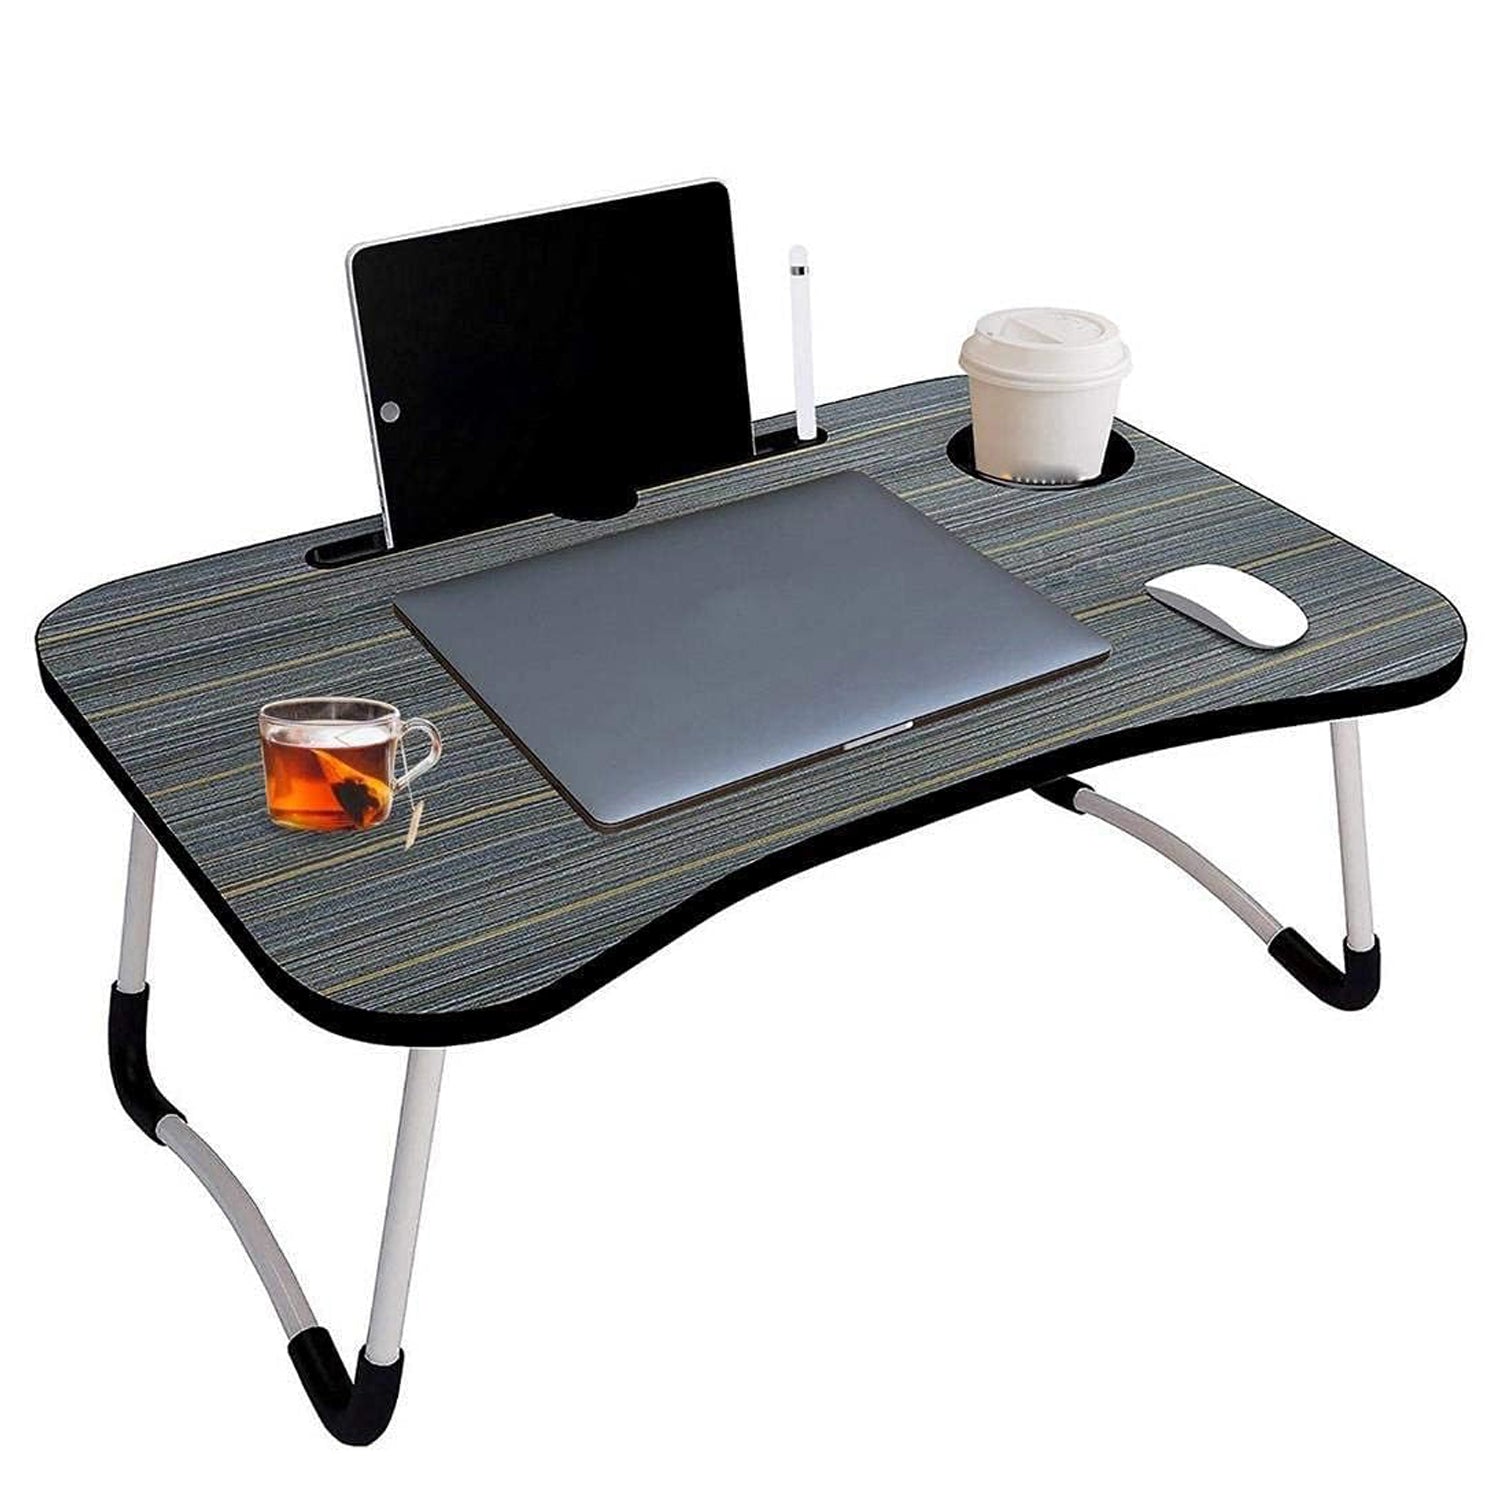 4492 Multi-Purpose Laptop Desk for Study and Reading with Foldable Non-Slip Legs Reading Table Tray , Laptop Table ,Laptop Stands, Laptop Desk, Foldable Study Laptop Table Dukandaily